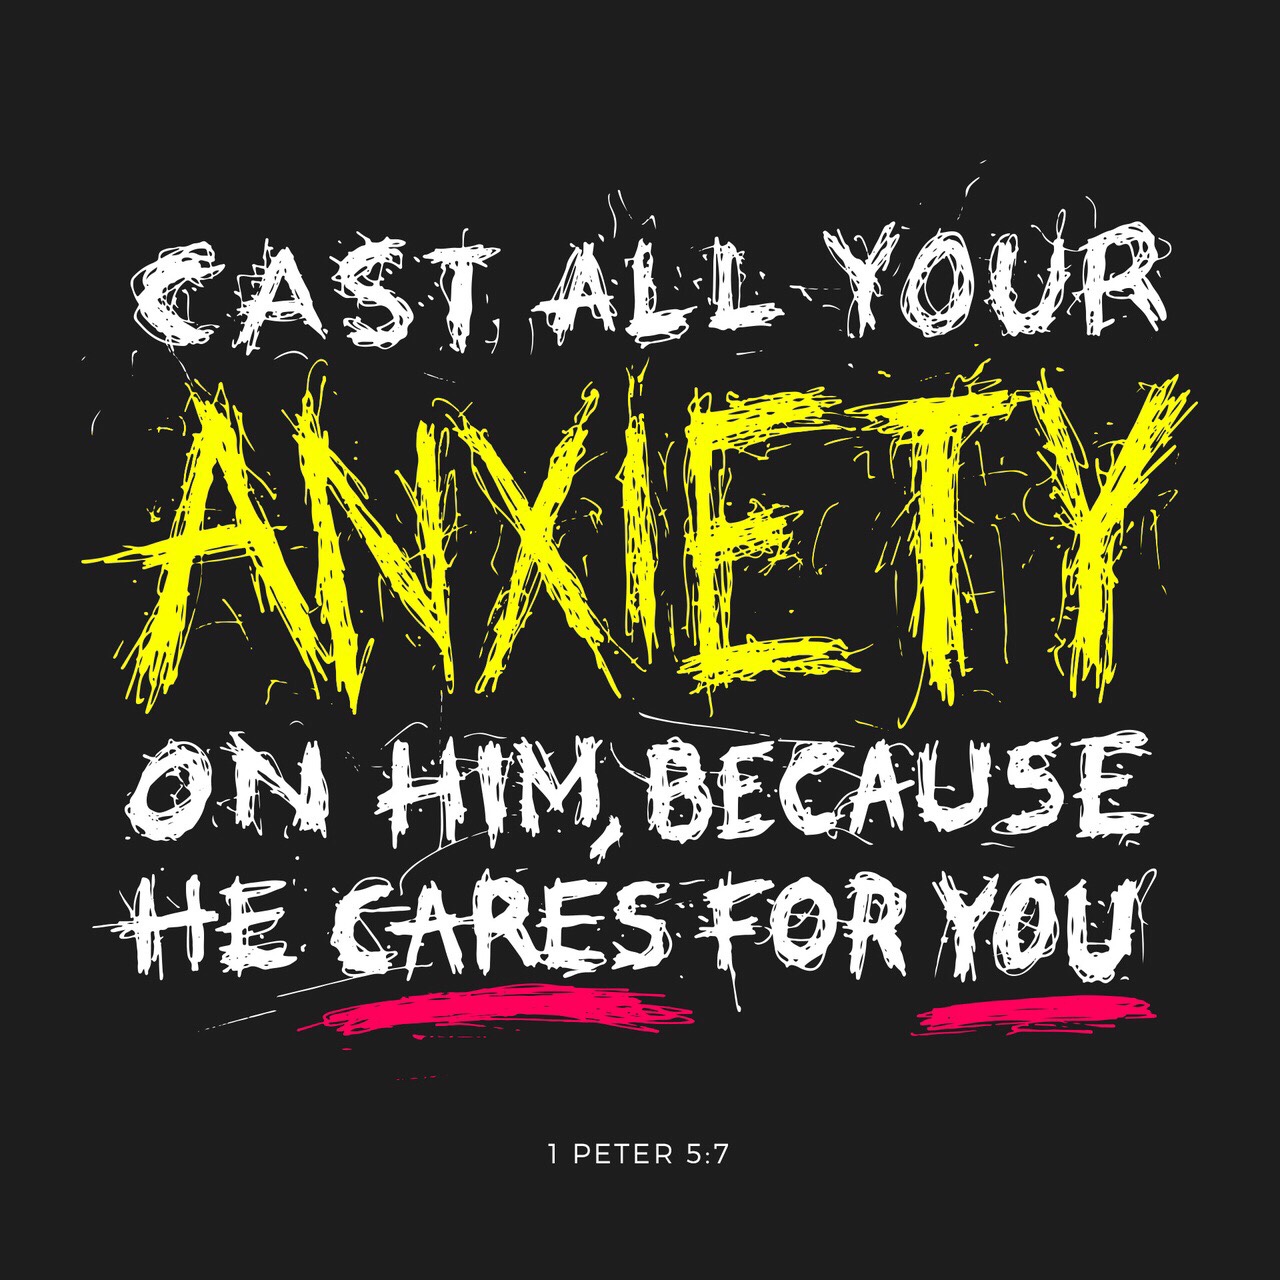 VOTD July 9, 2019 - casting all your anxiety on Him, because He cares for you. 1 PETER‬ ‭5:7‬ ‭NASB‬‬